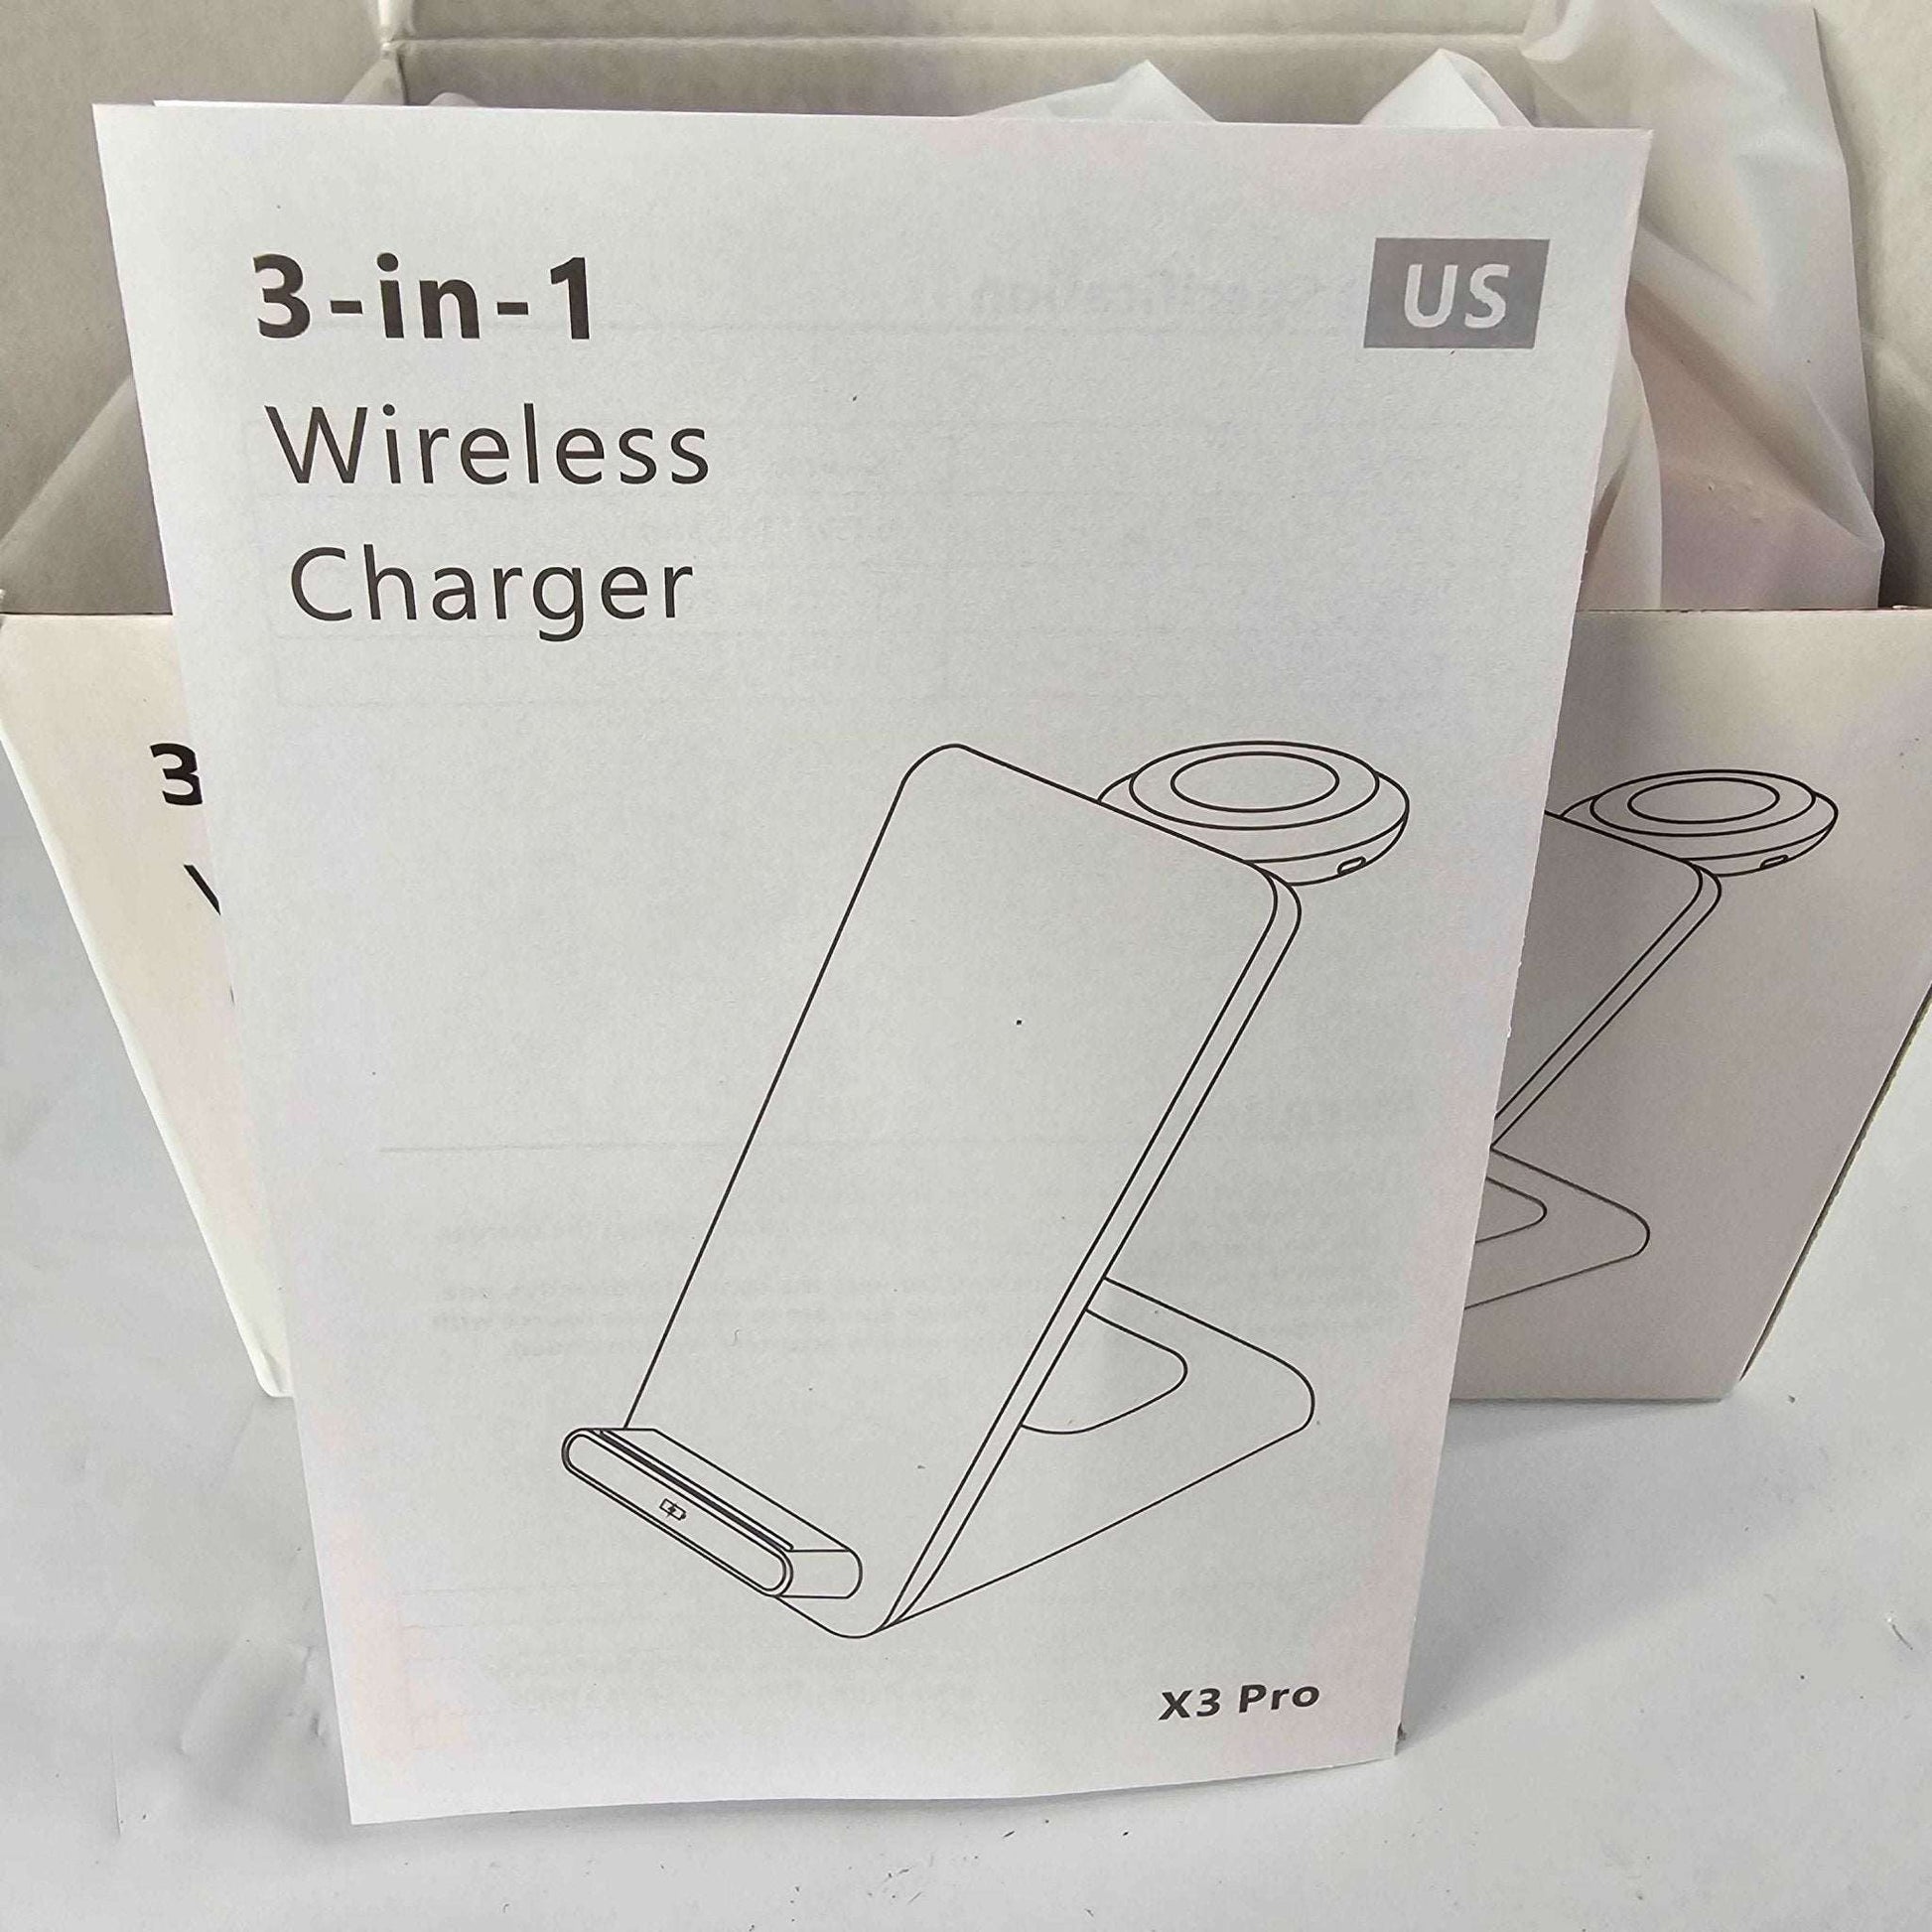 3 in 1 Wireless Charger Qkxc X3Pro - DQ Distribution